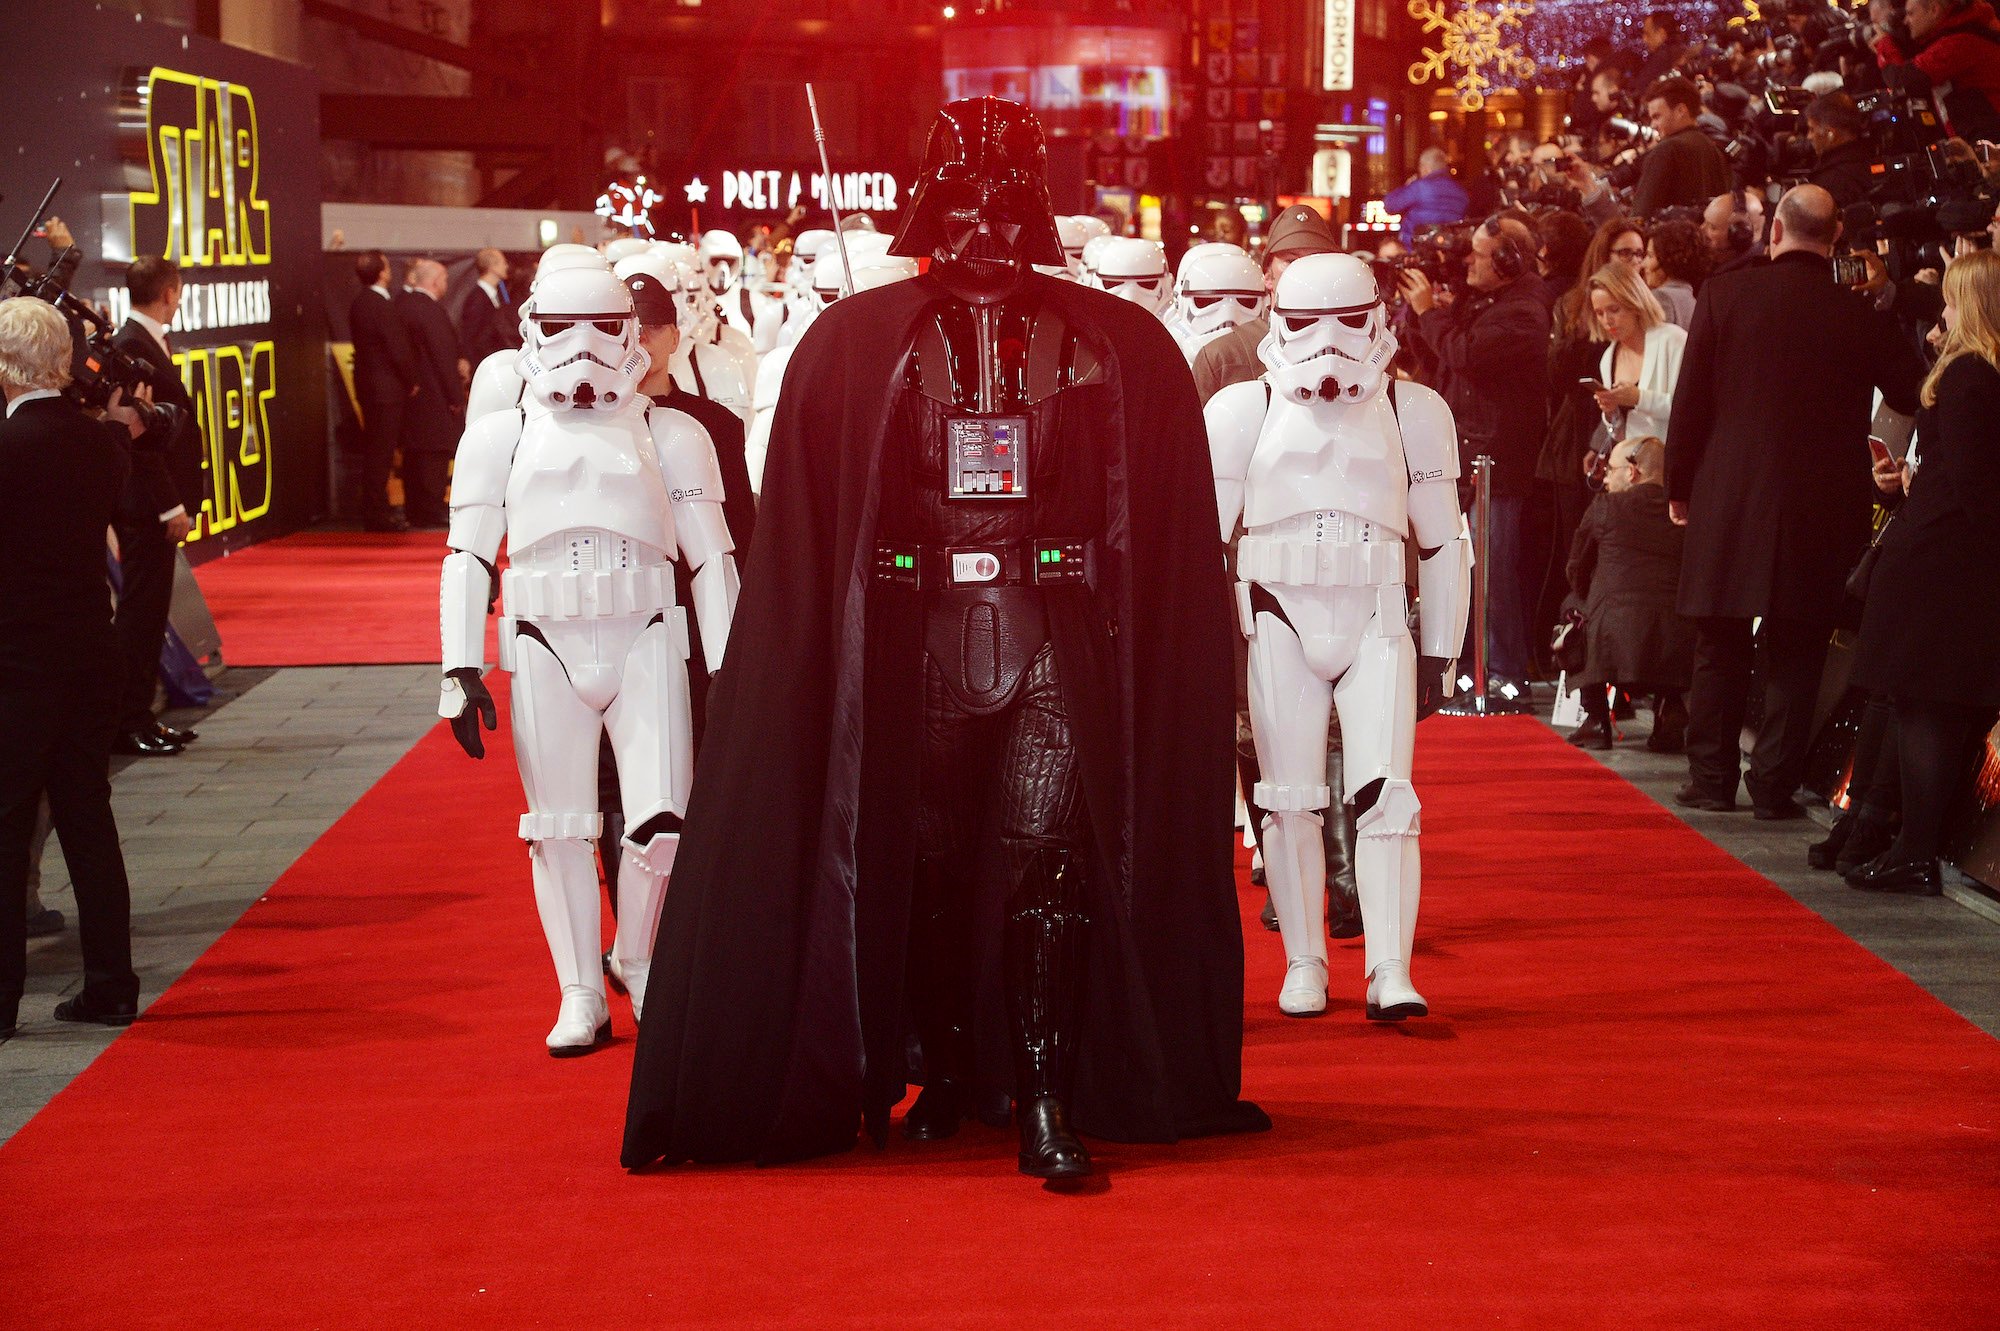 Darth Vader and Stormtroppers on the red carpet